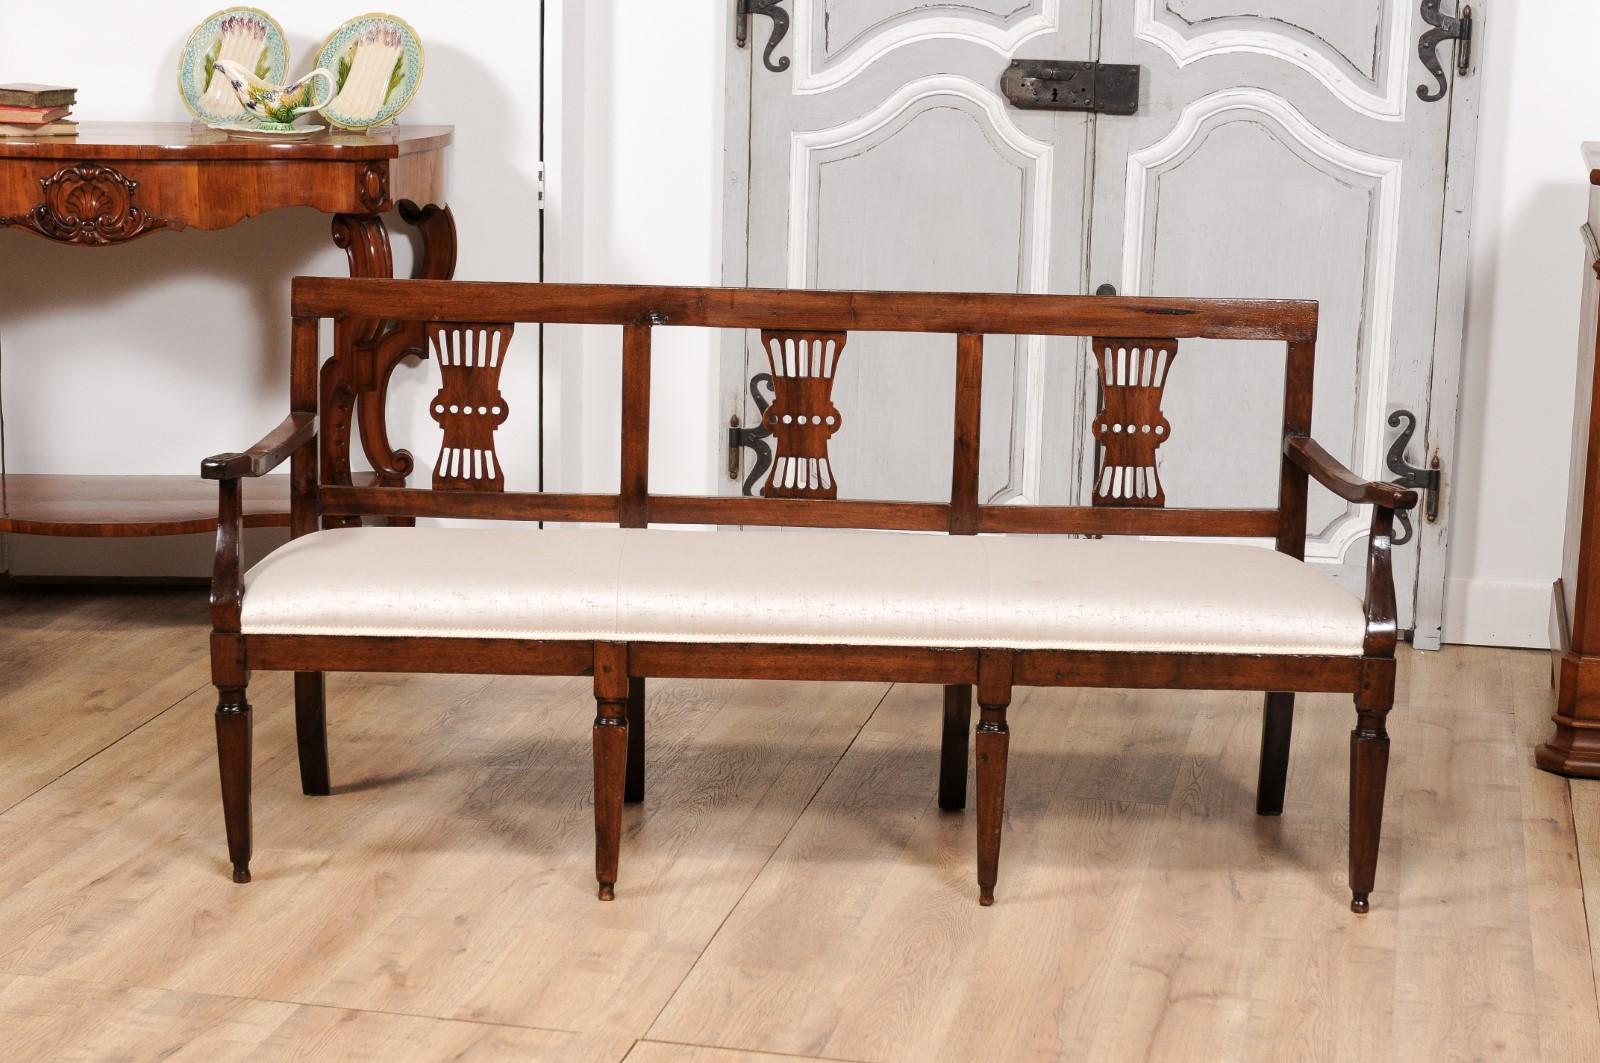 Italian 19th Century Walnut Three-Seater Bench with Carved Splats and Upholstery For Sale 1